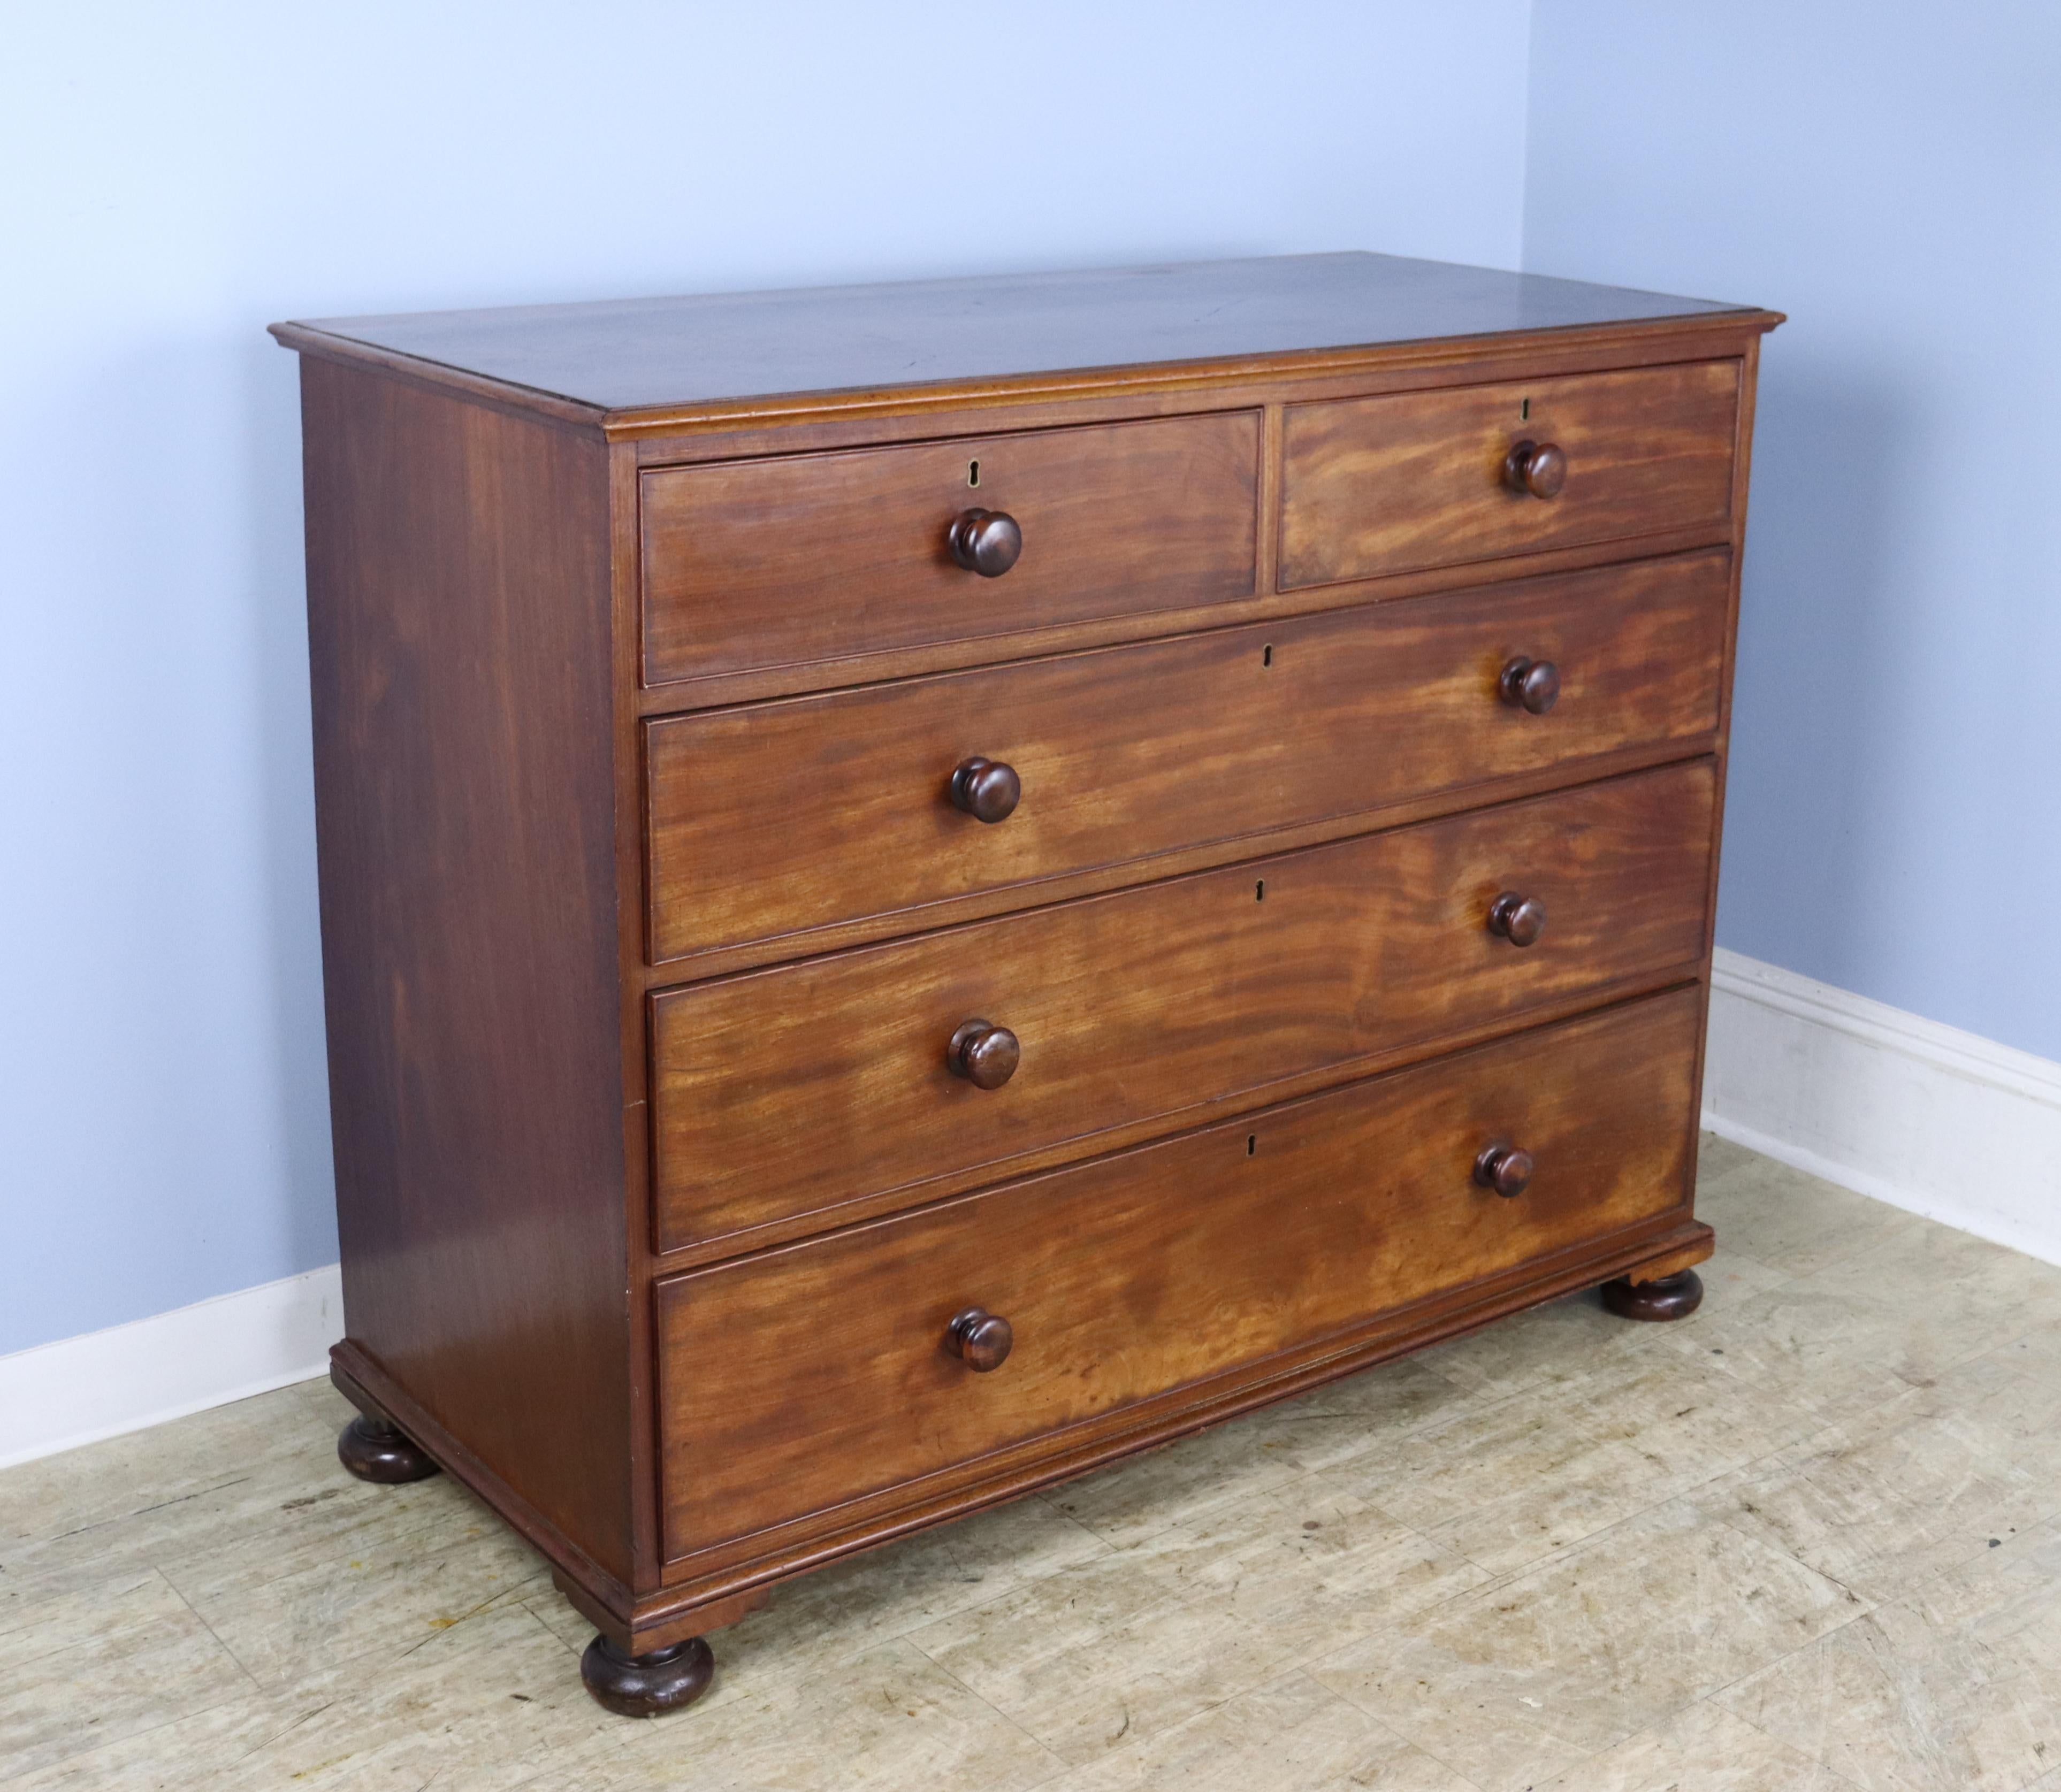 A large chest of drawers in rich mahogany, with very deep drawers and stylish glossy knobs.  Sweet bun feet complete the look.  The brass keyholes are original although there are no keys.  There is some light wear throughout the piece, mostly light